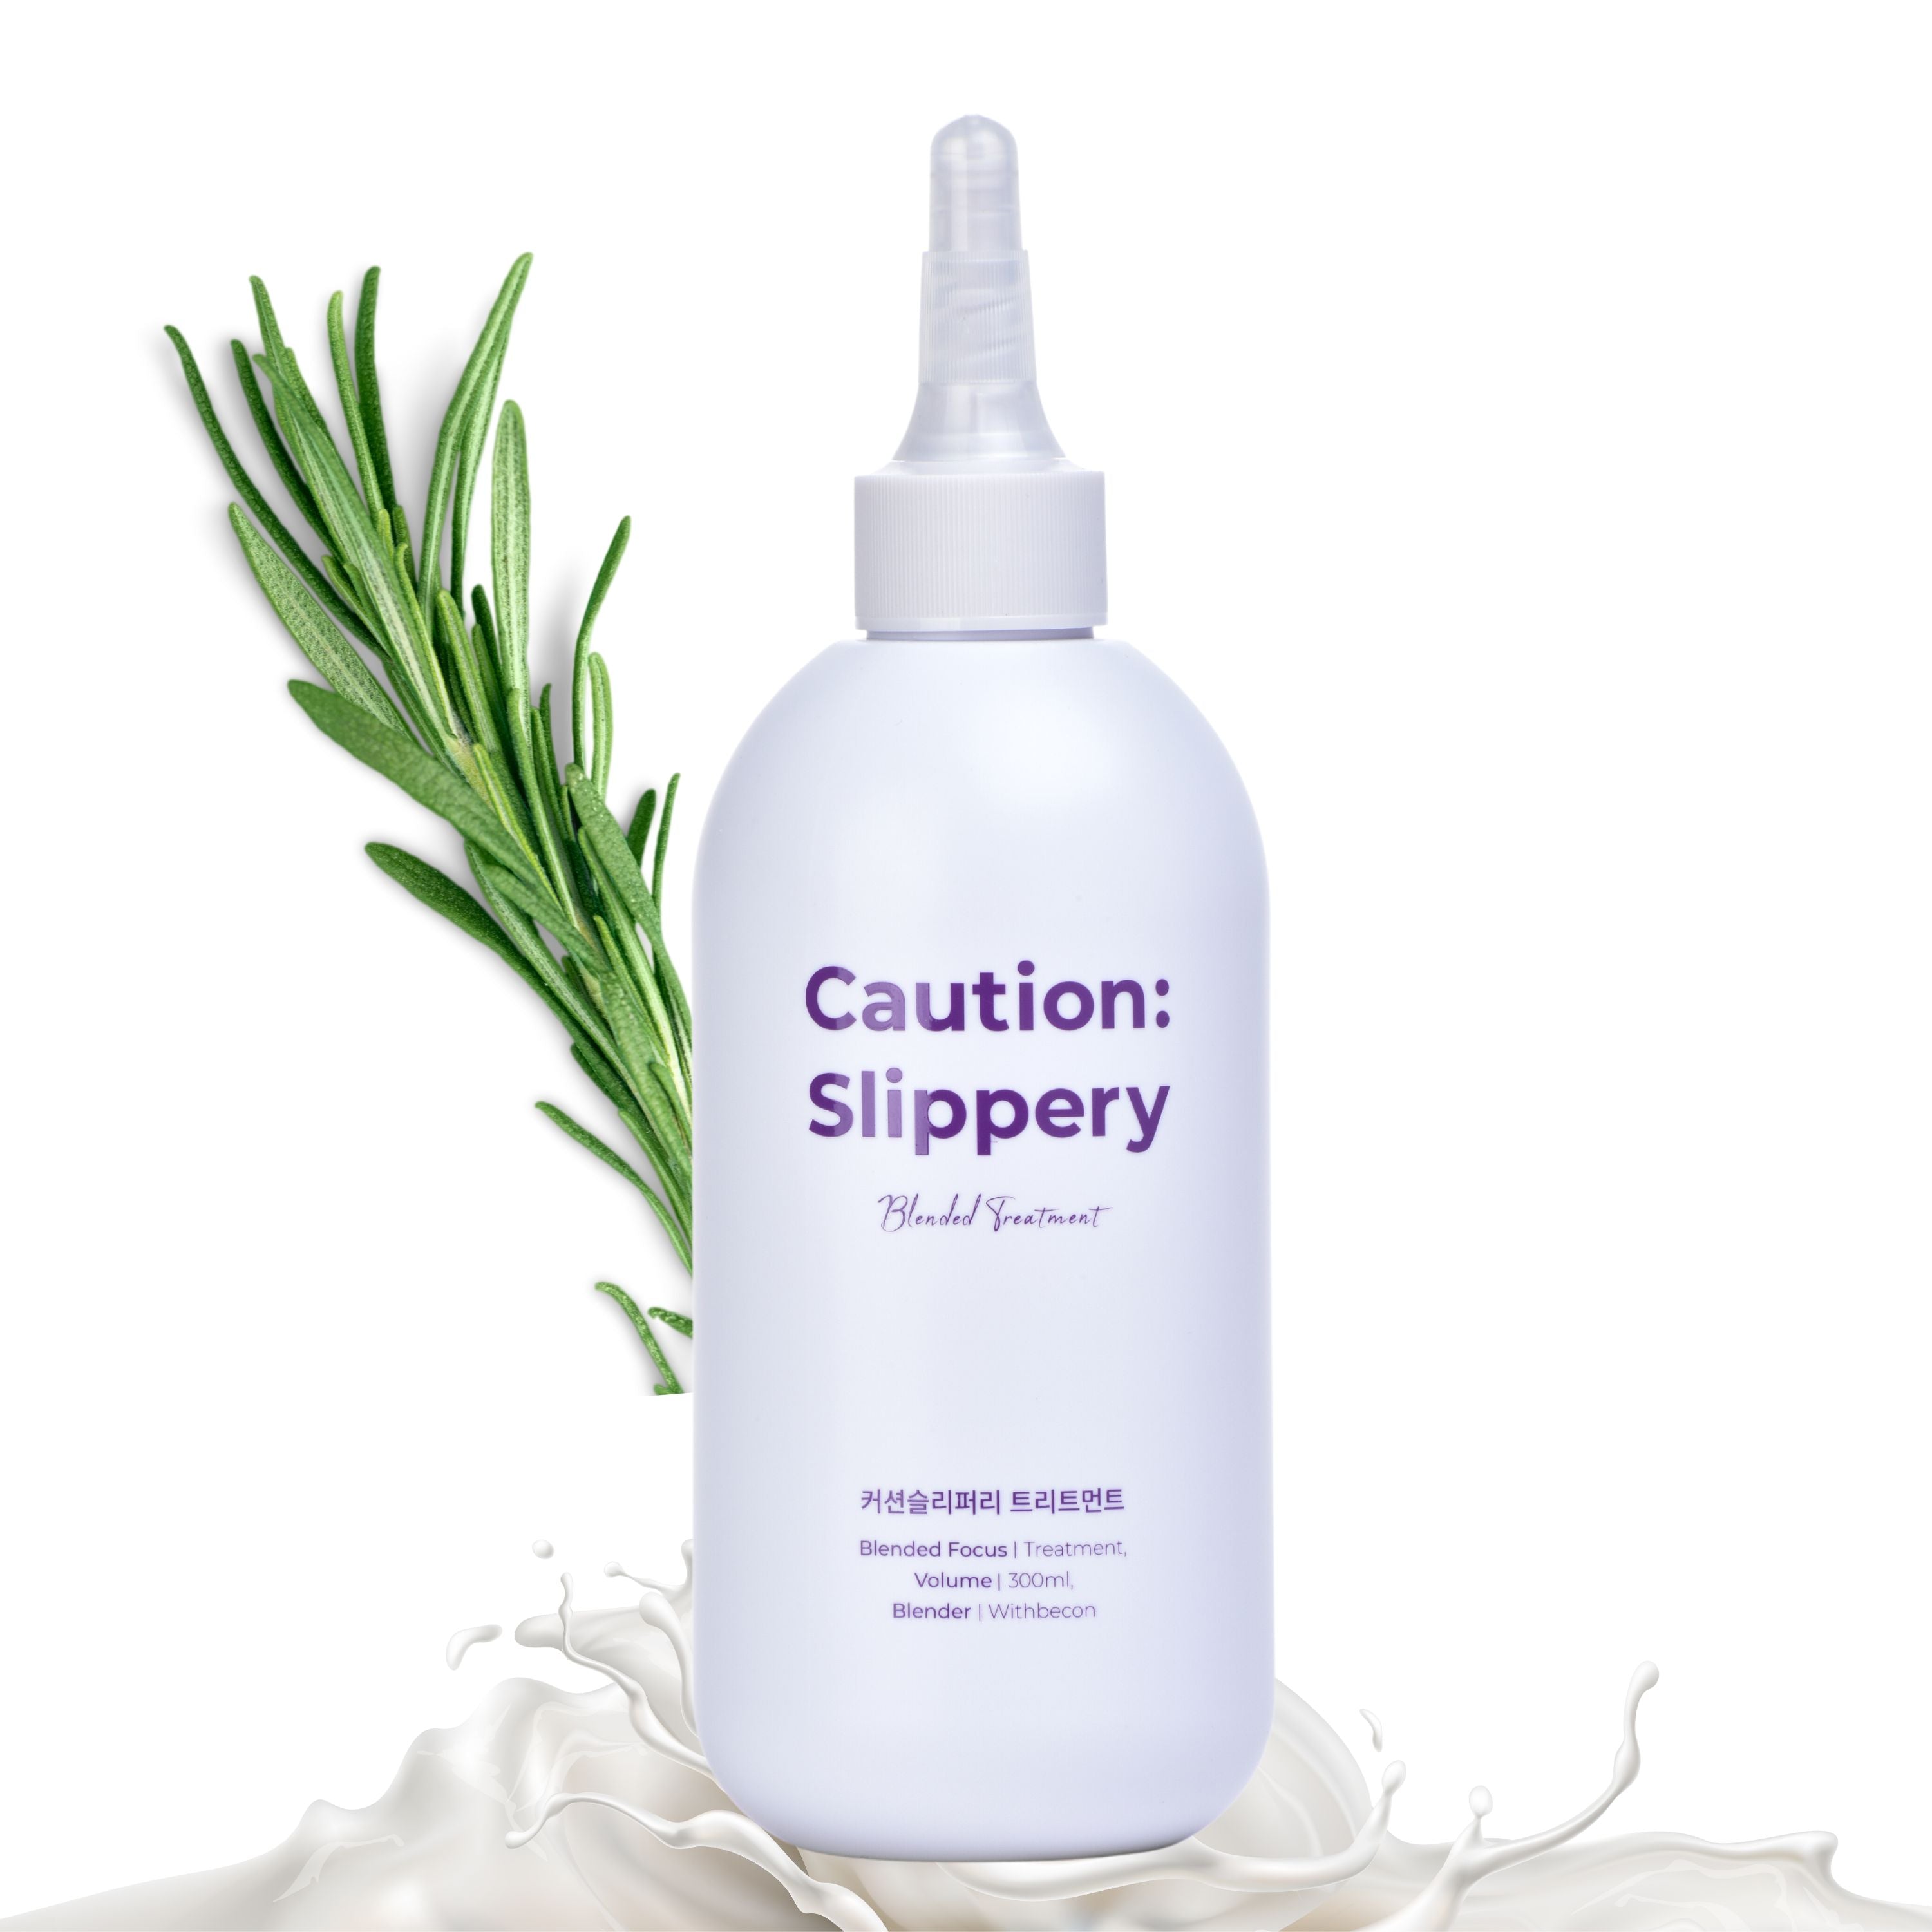 WithBecon Caution Slippery Hair Treatment Conditioner, leave in conditioner,frizzy hair, hair loss treatments, hair growth products, deep conditioner, conditioner, liquid type conditioner,hair styler, frizzy hair, hair care product, best shampoo and conditioner, hair vitamins, heat protectant for hair, 